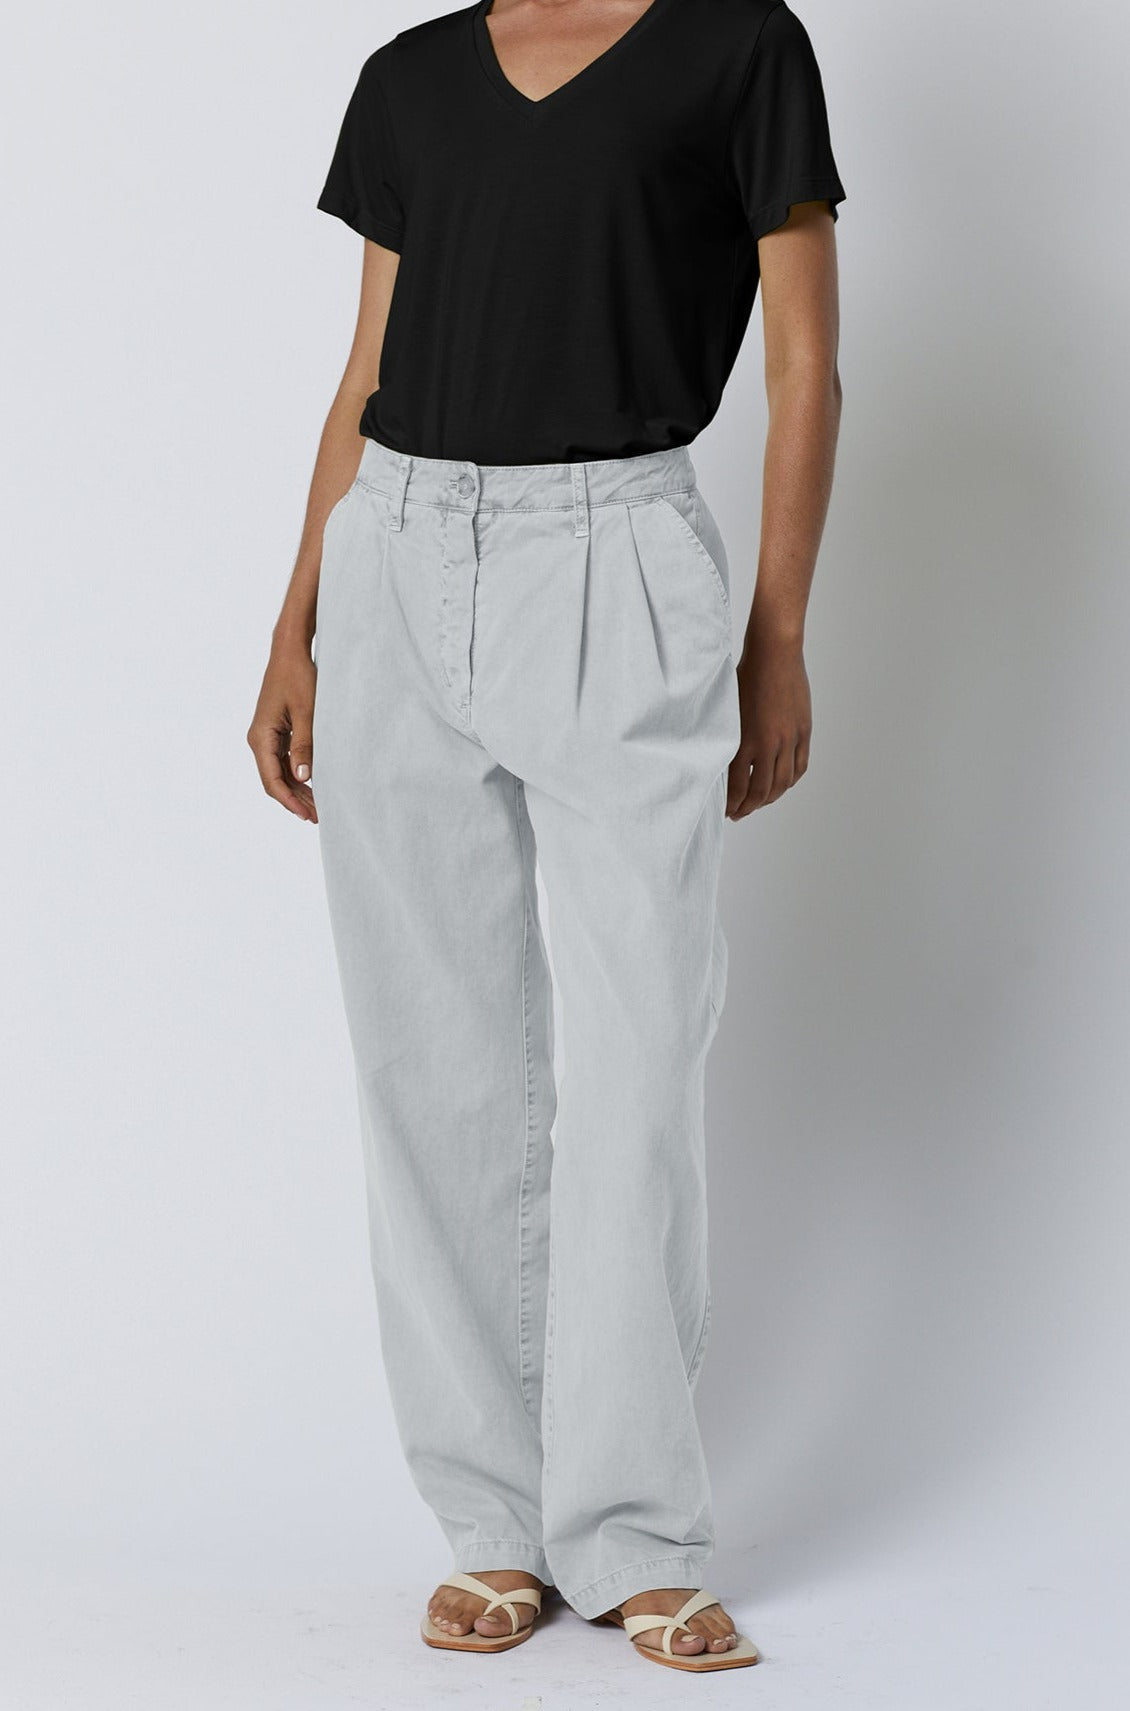 Temescal Pant in candle front-26007137222849